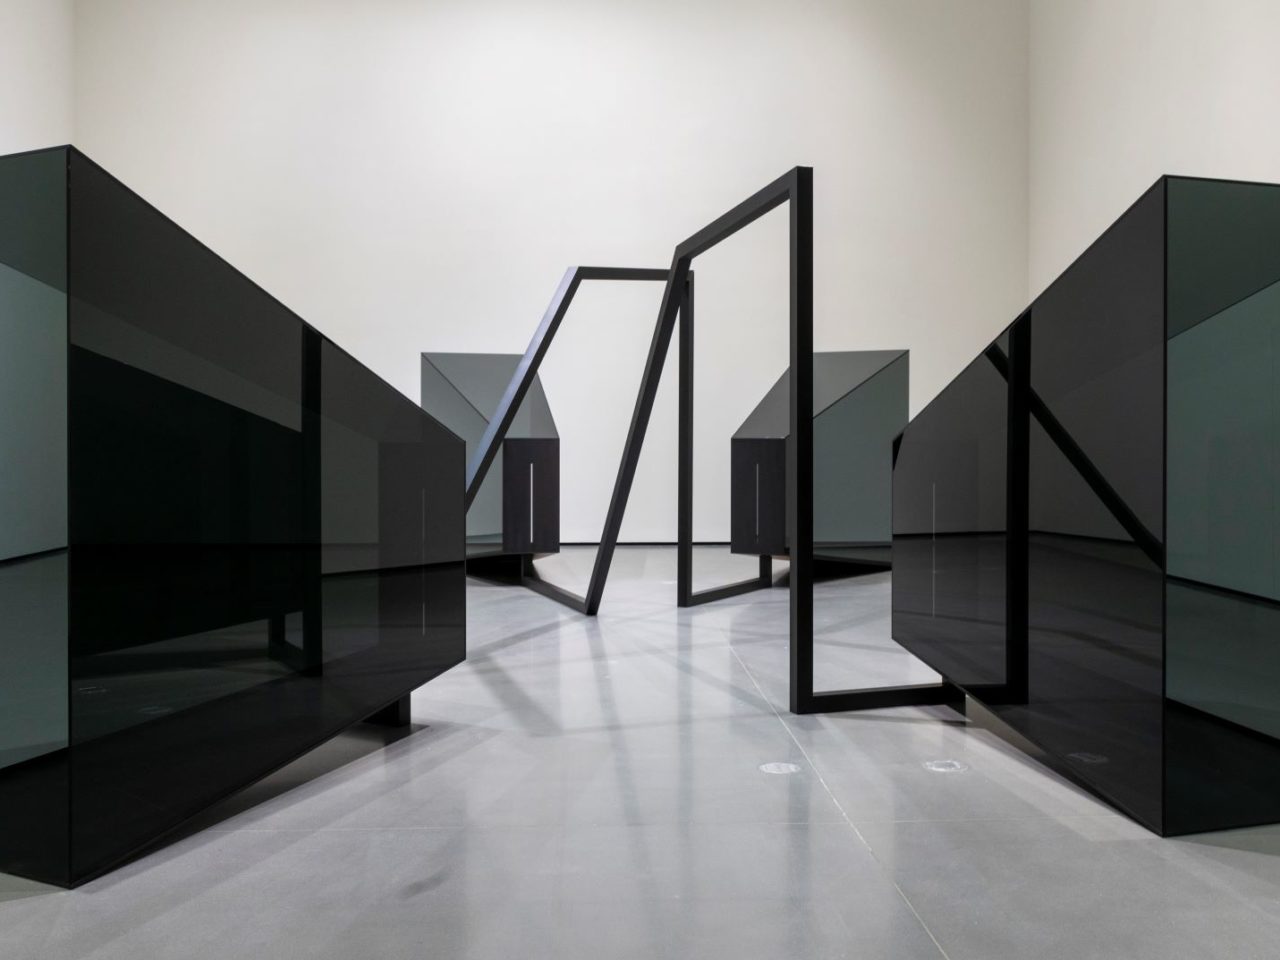 An installation in a white room, the installation is four large reflective black cuboids pointing towards each other with connecting tails